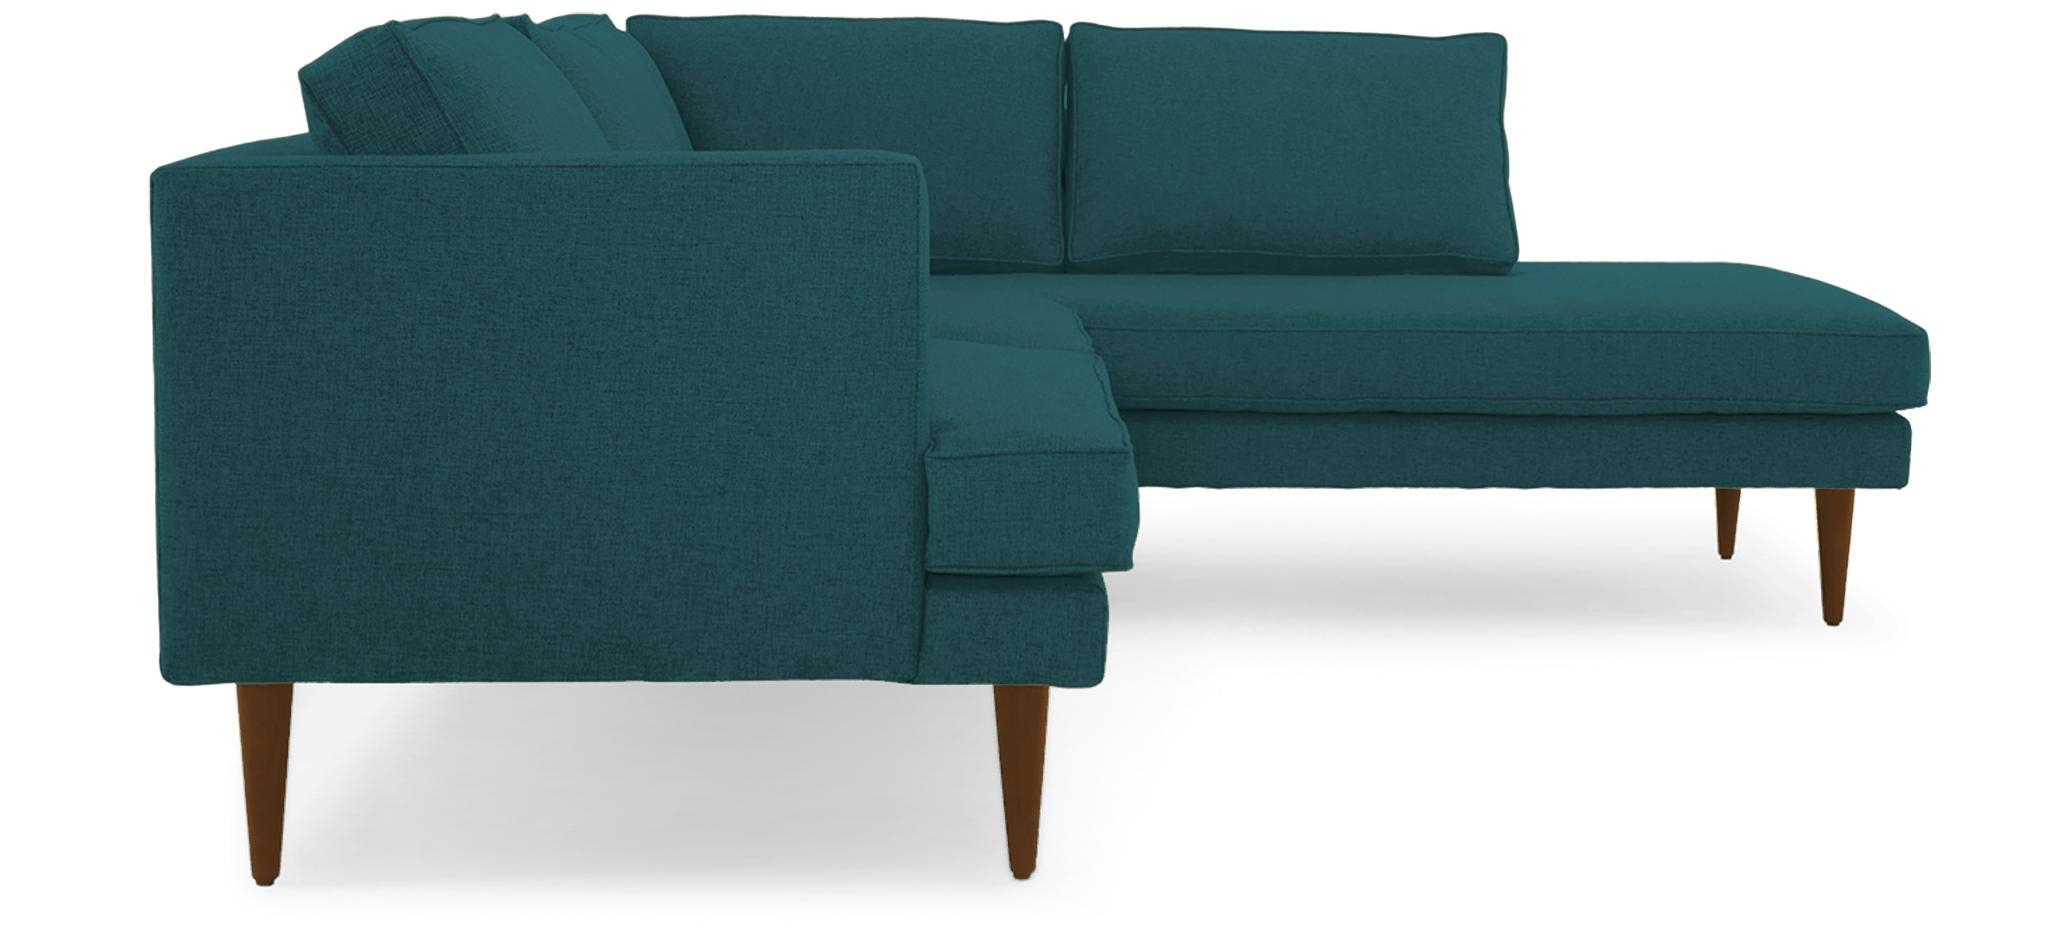 Blue Preston Mid Century Modern Sectional with Bumper (2 piece) - Royale Peacock - Mocha - Left - Image 2